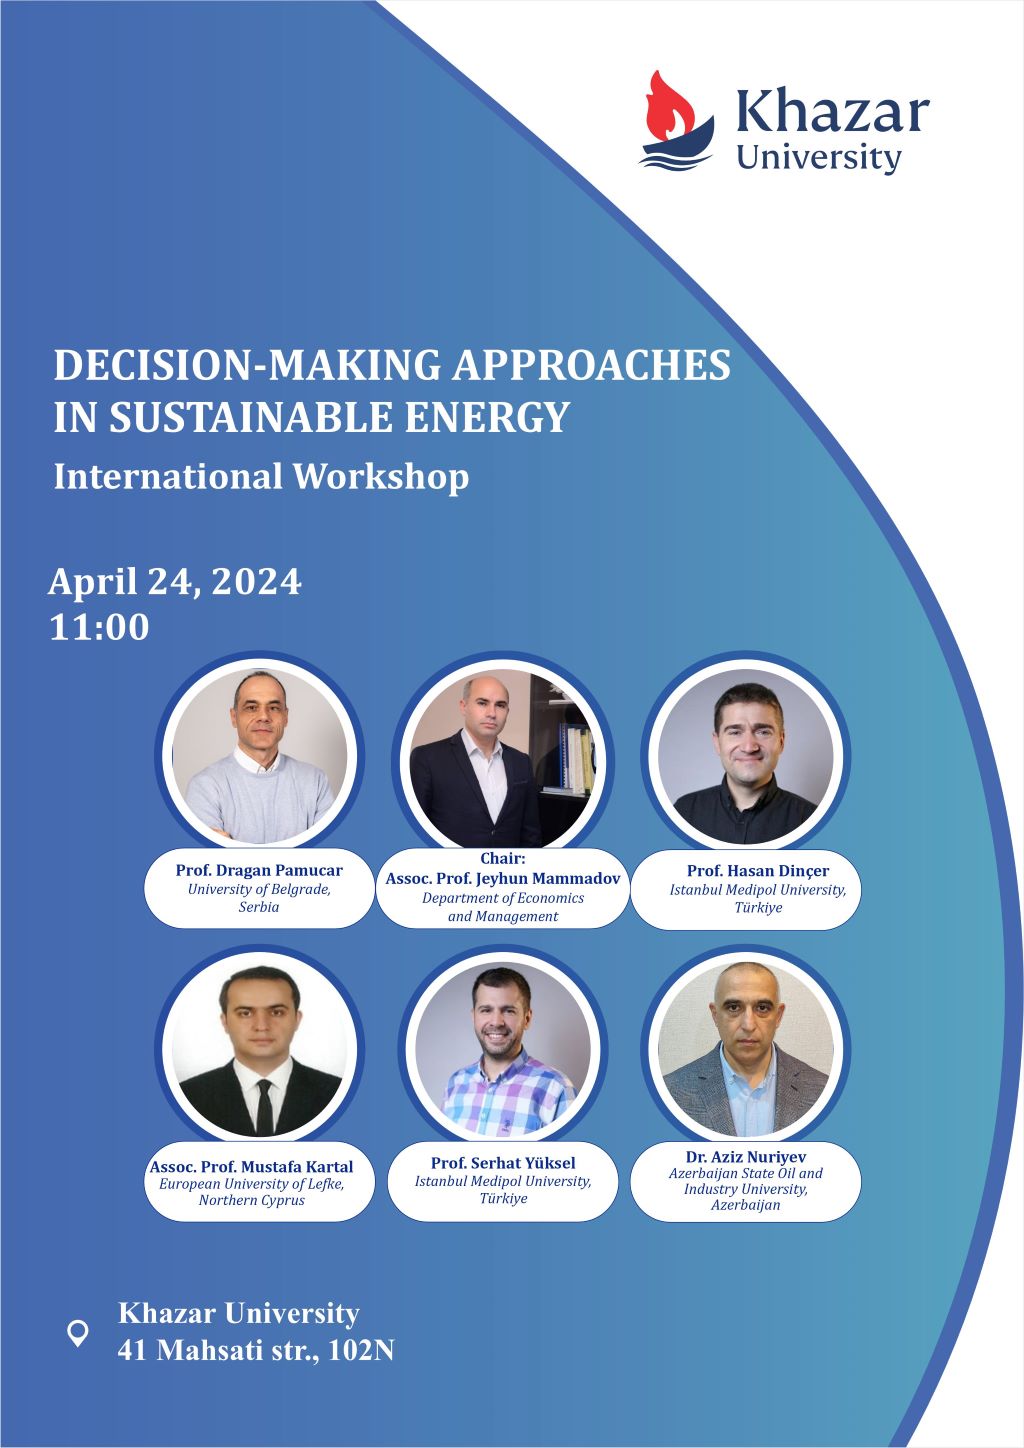 International Workshop on Decision-making Approaches in Sustainable Energy